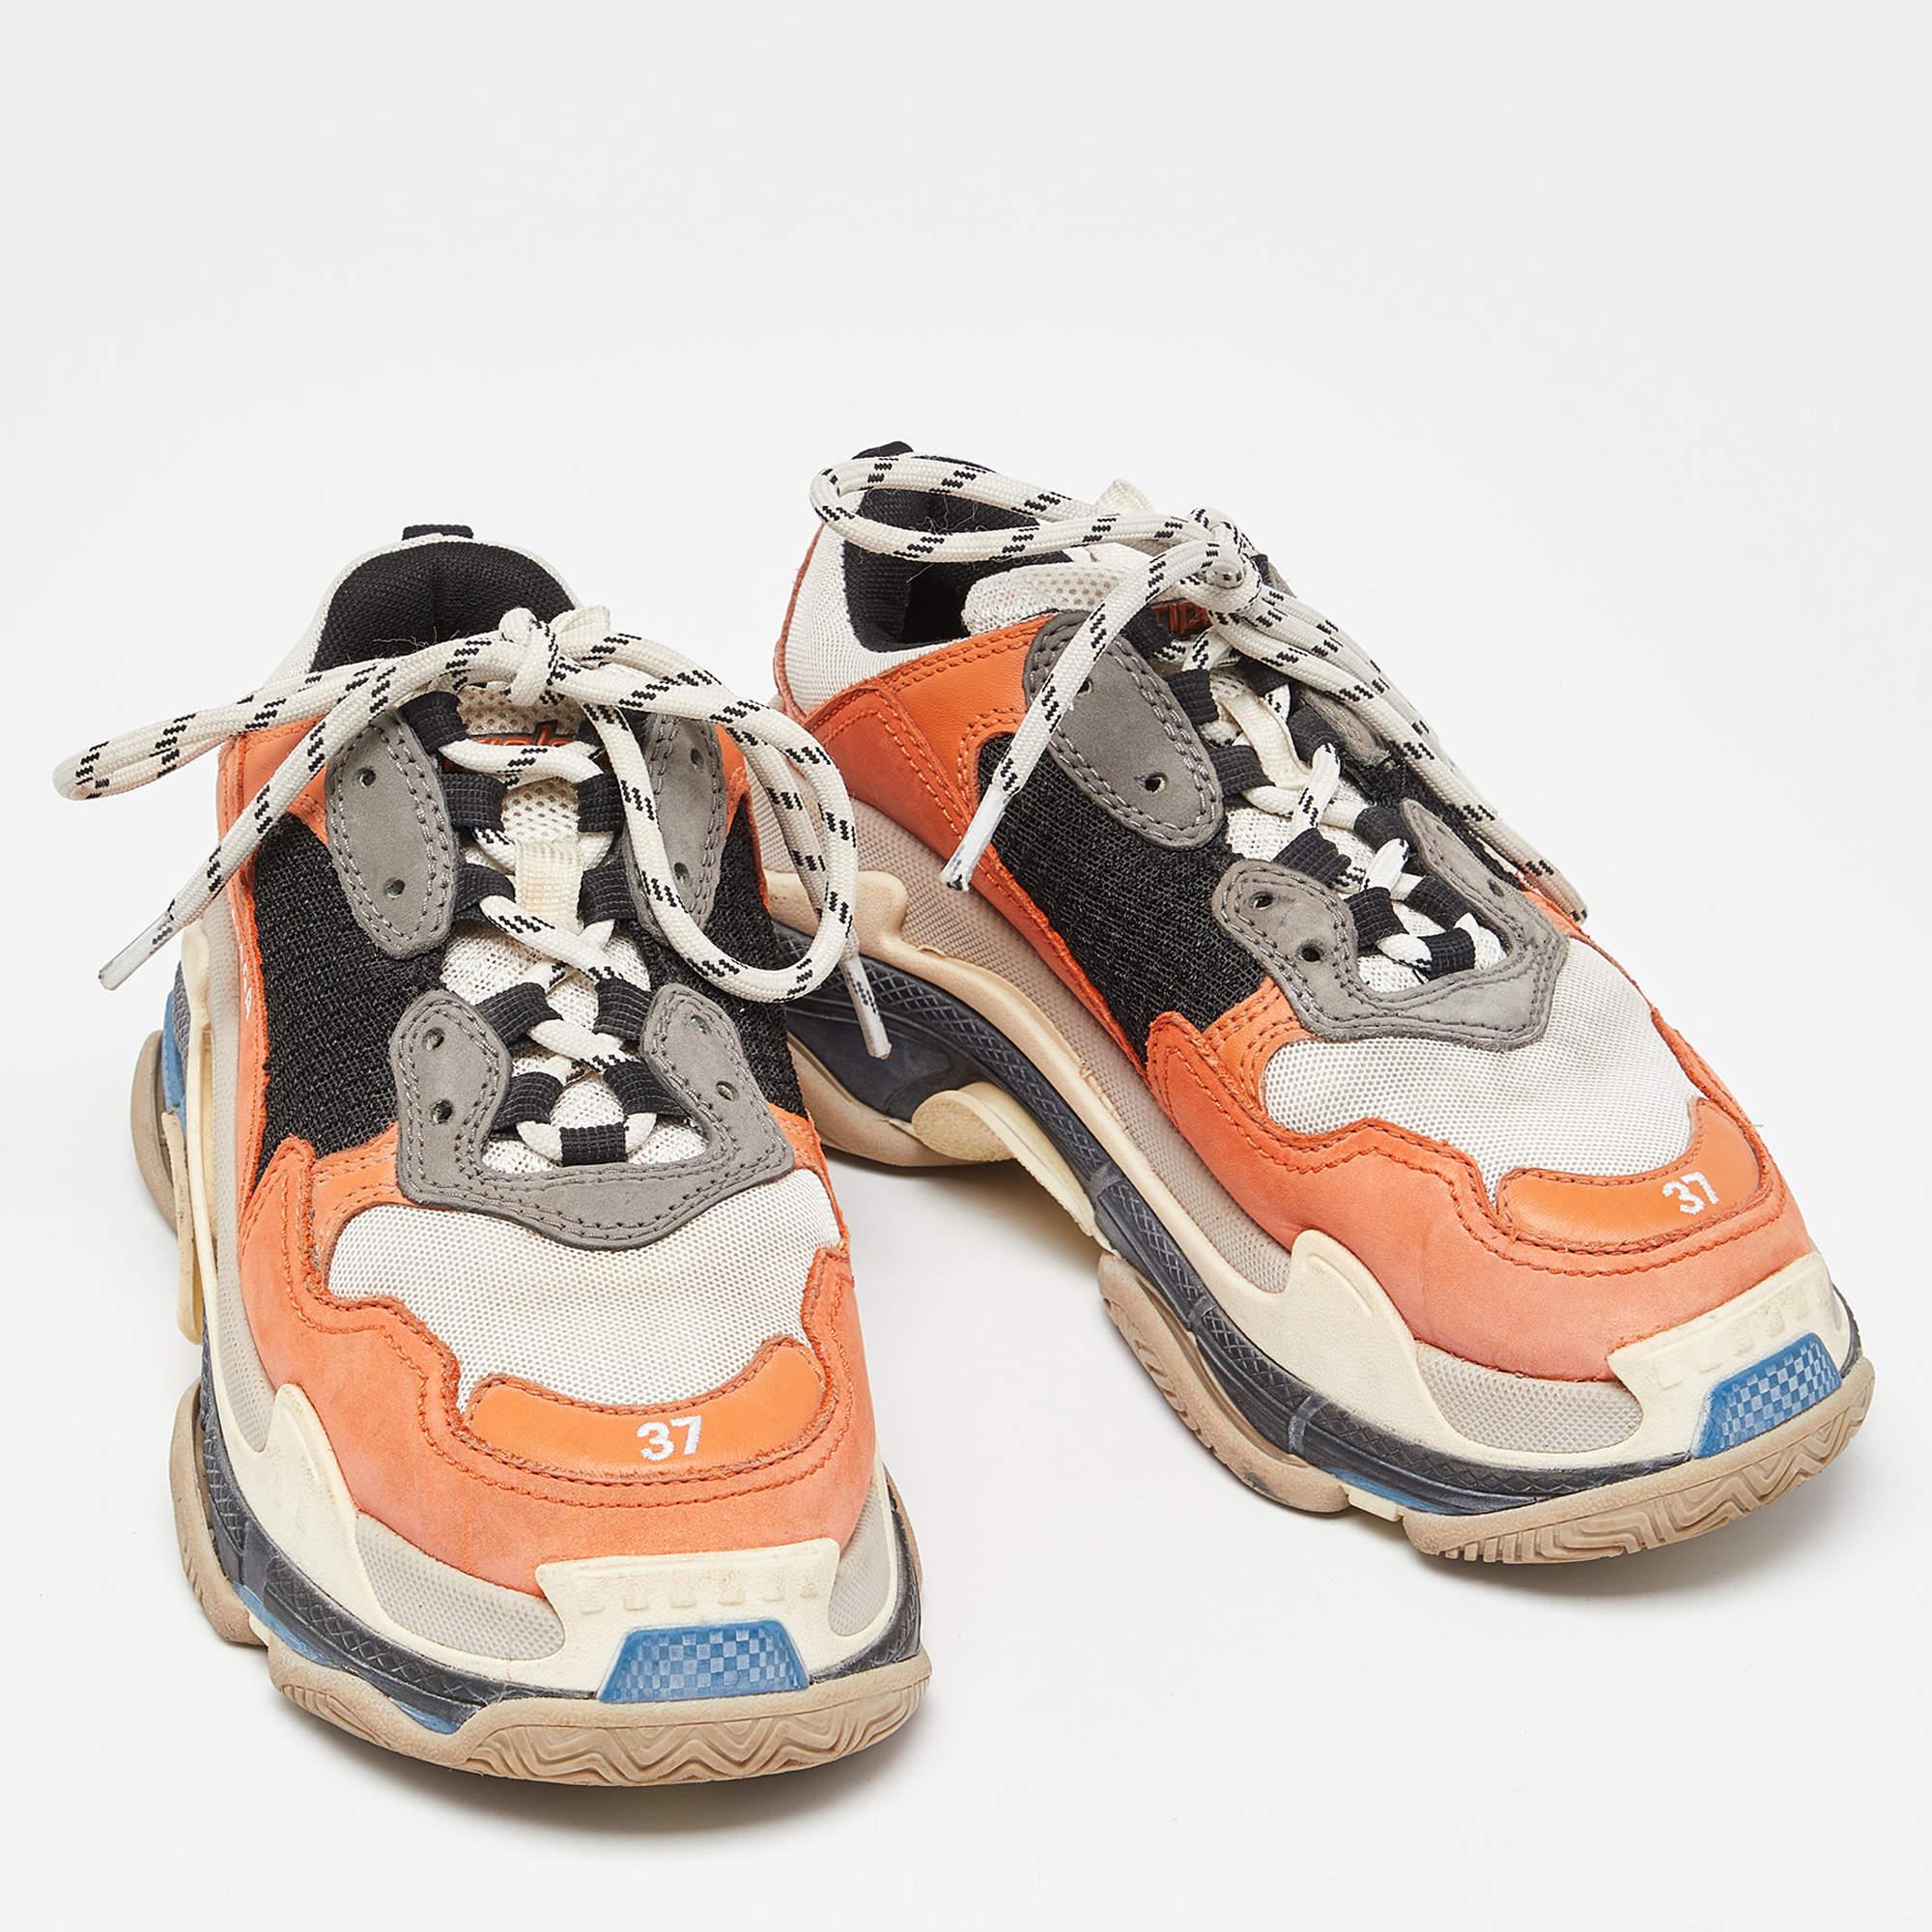 Balenciaga Tricolor Leather and Mesh Triple S Sneakers Size 37 For Sale 2